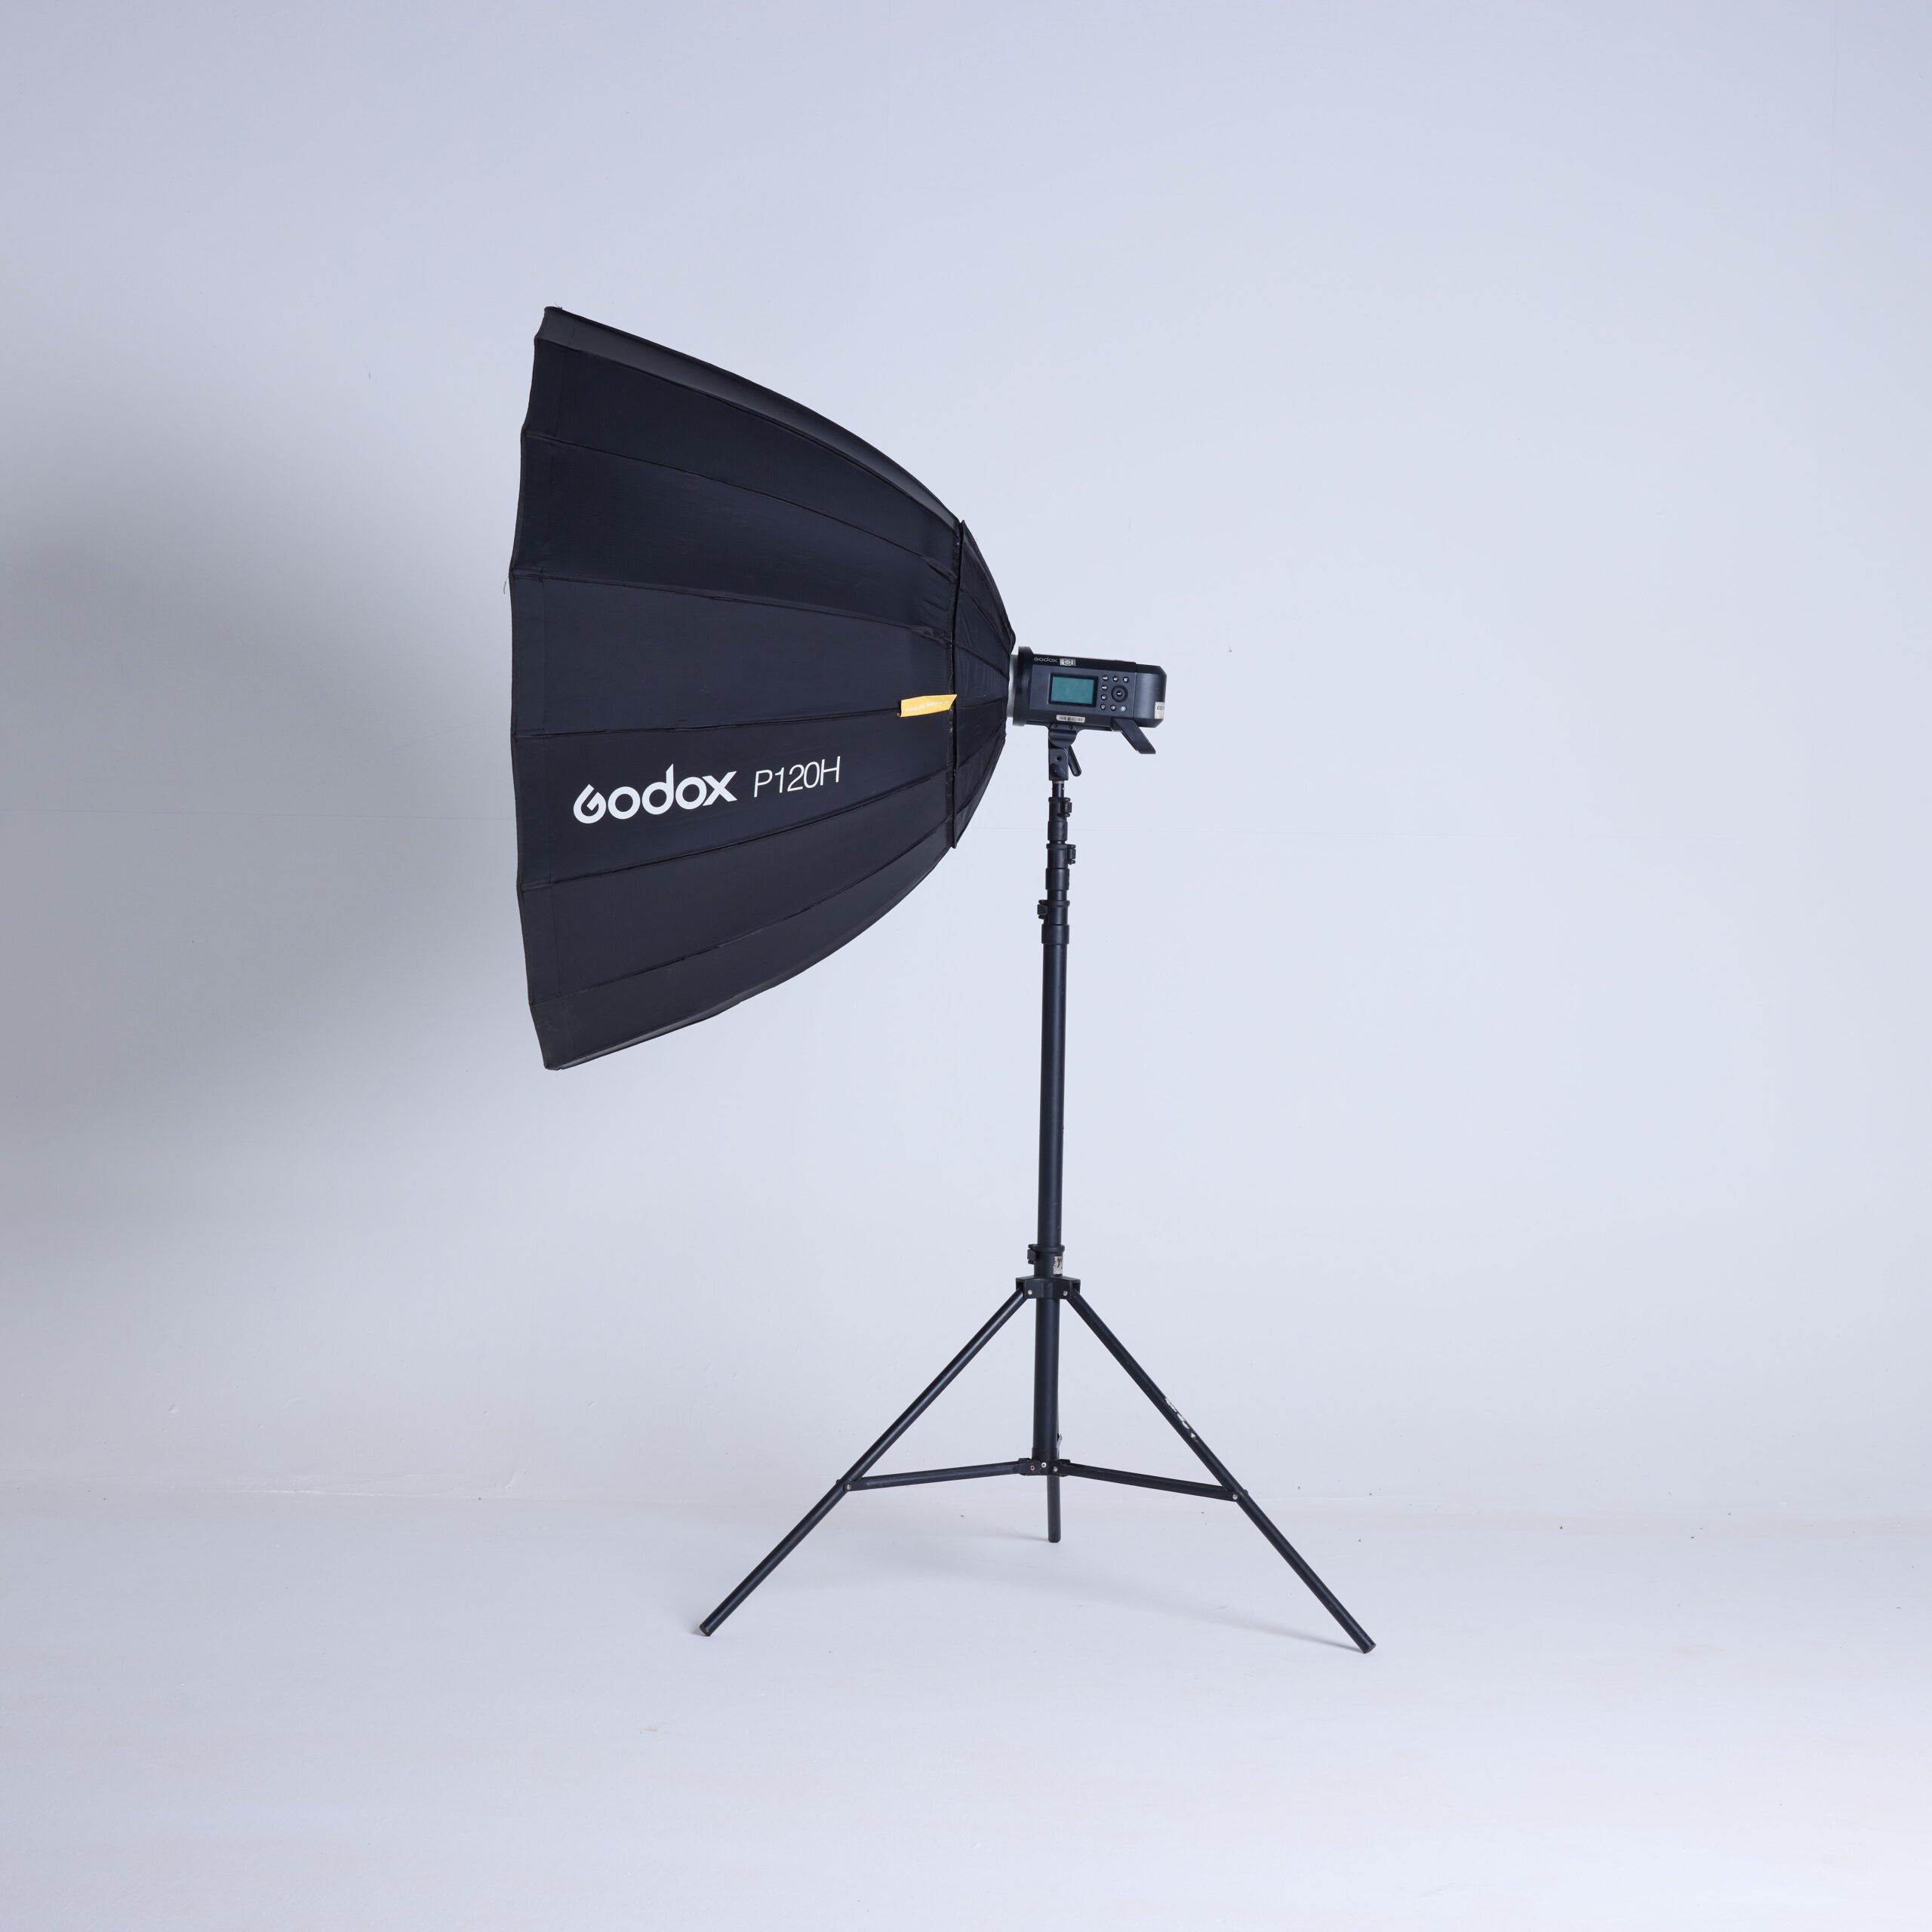 godox-p120h-parabolic-softbox-120cm-high-temperature-resistant-for-bowens-mount